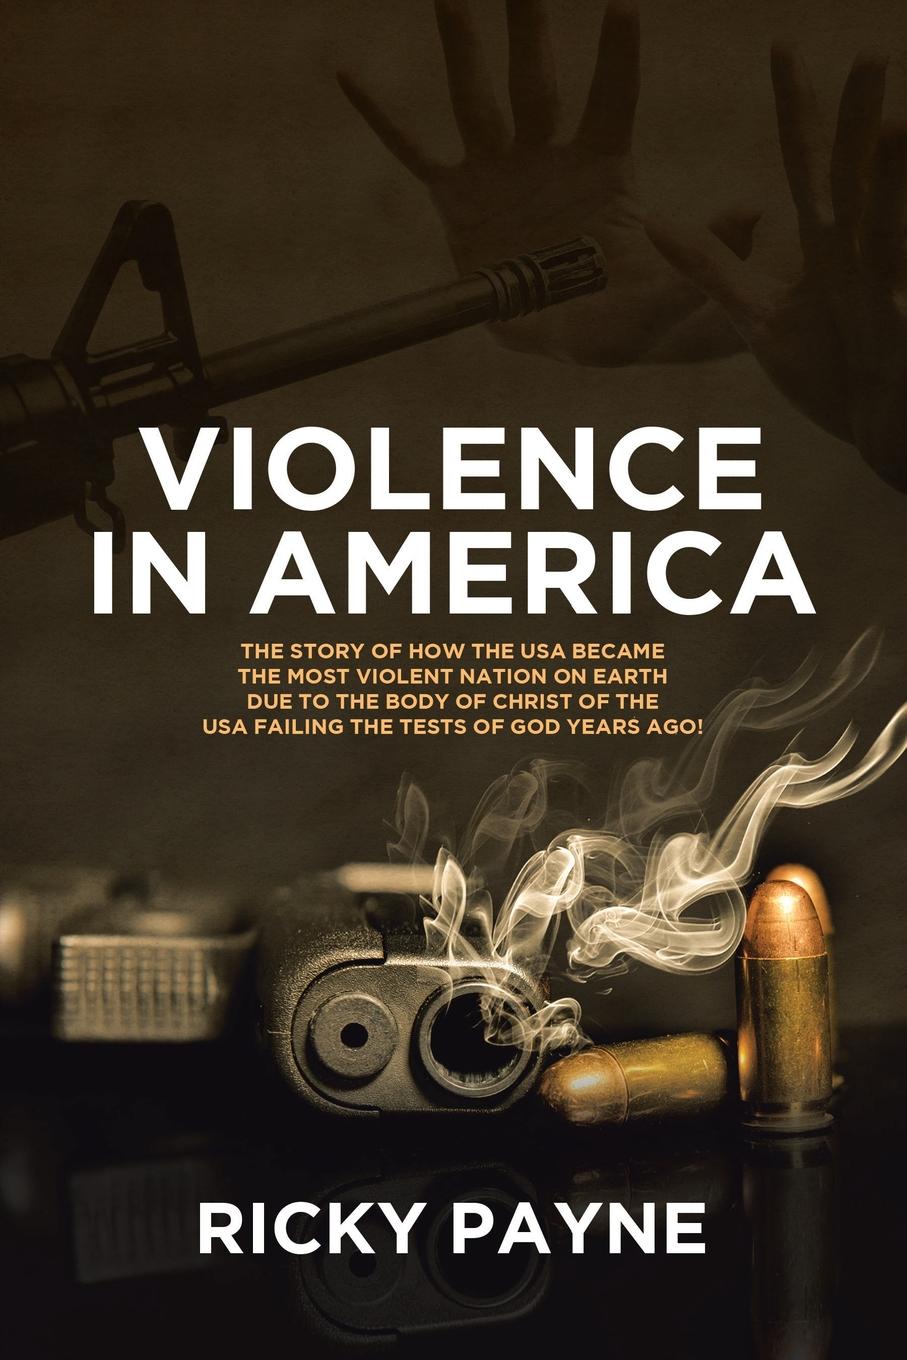 Violence In America. The story of how the USA became the most violent nation on earth due to the Body of Christ of the USA failing the tests of God years ago!